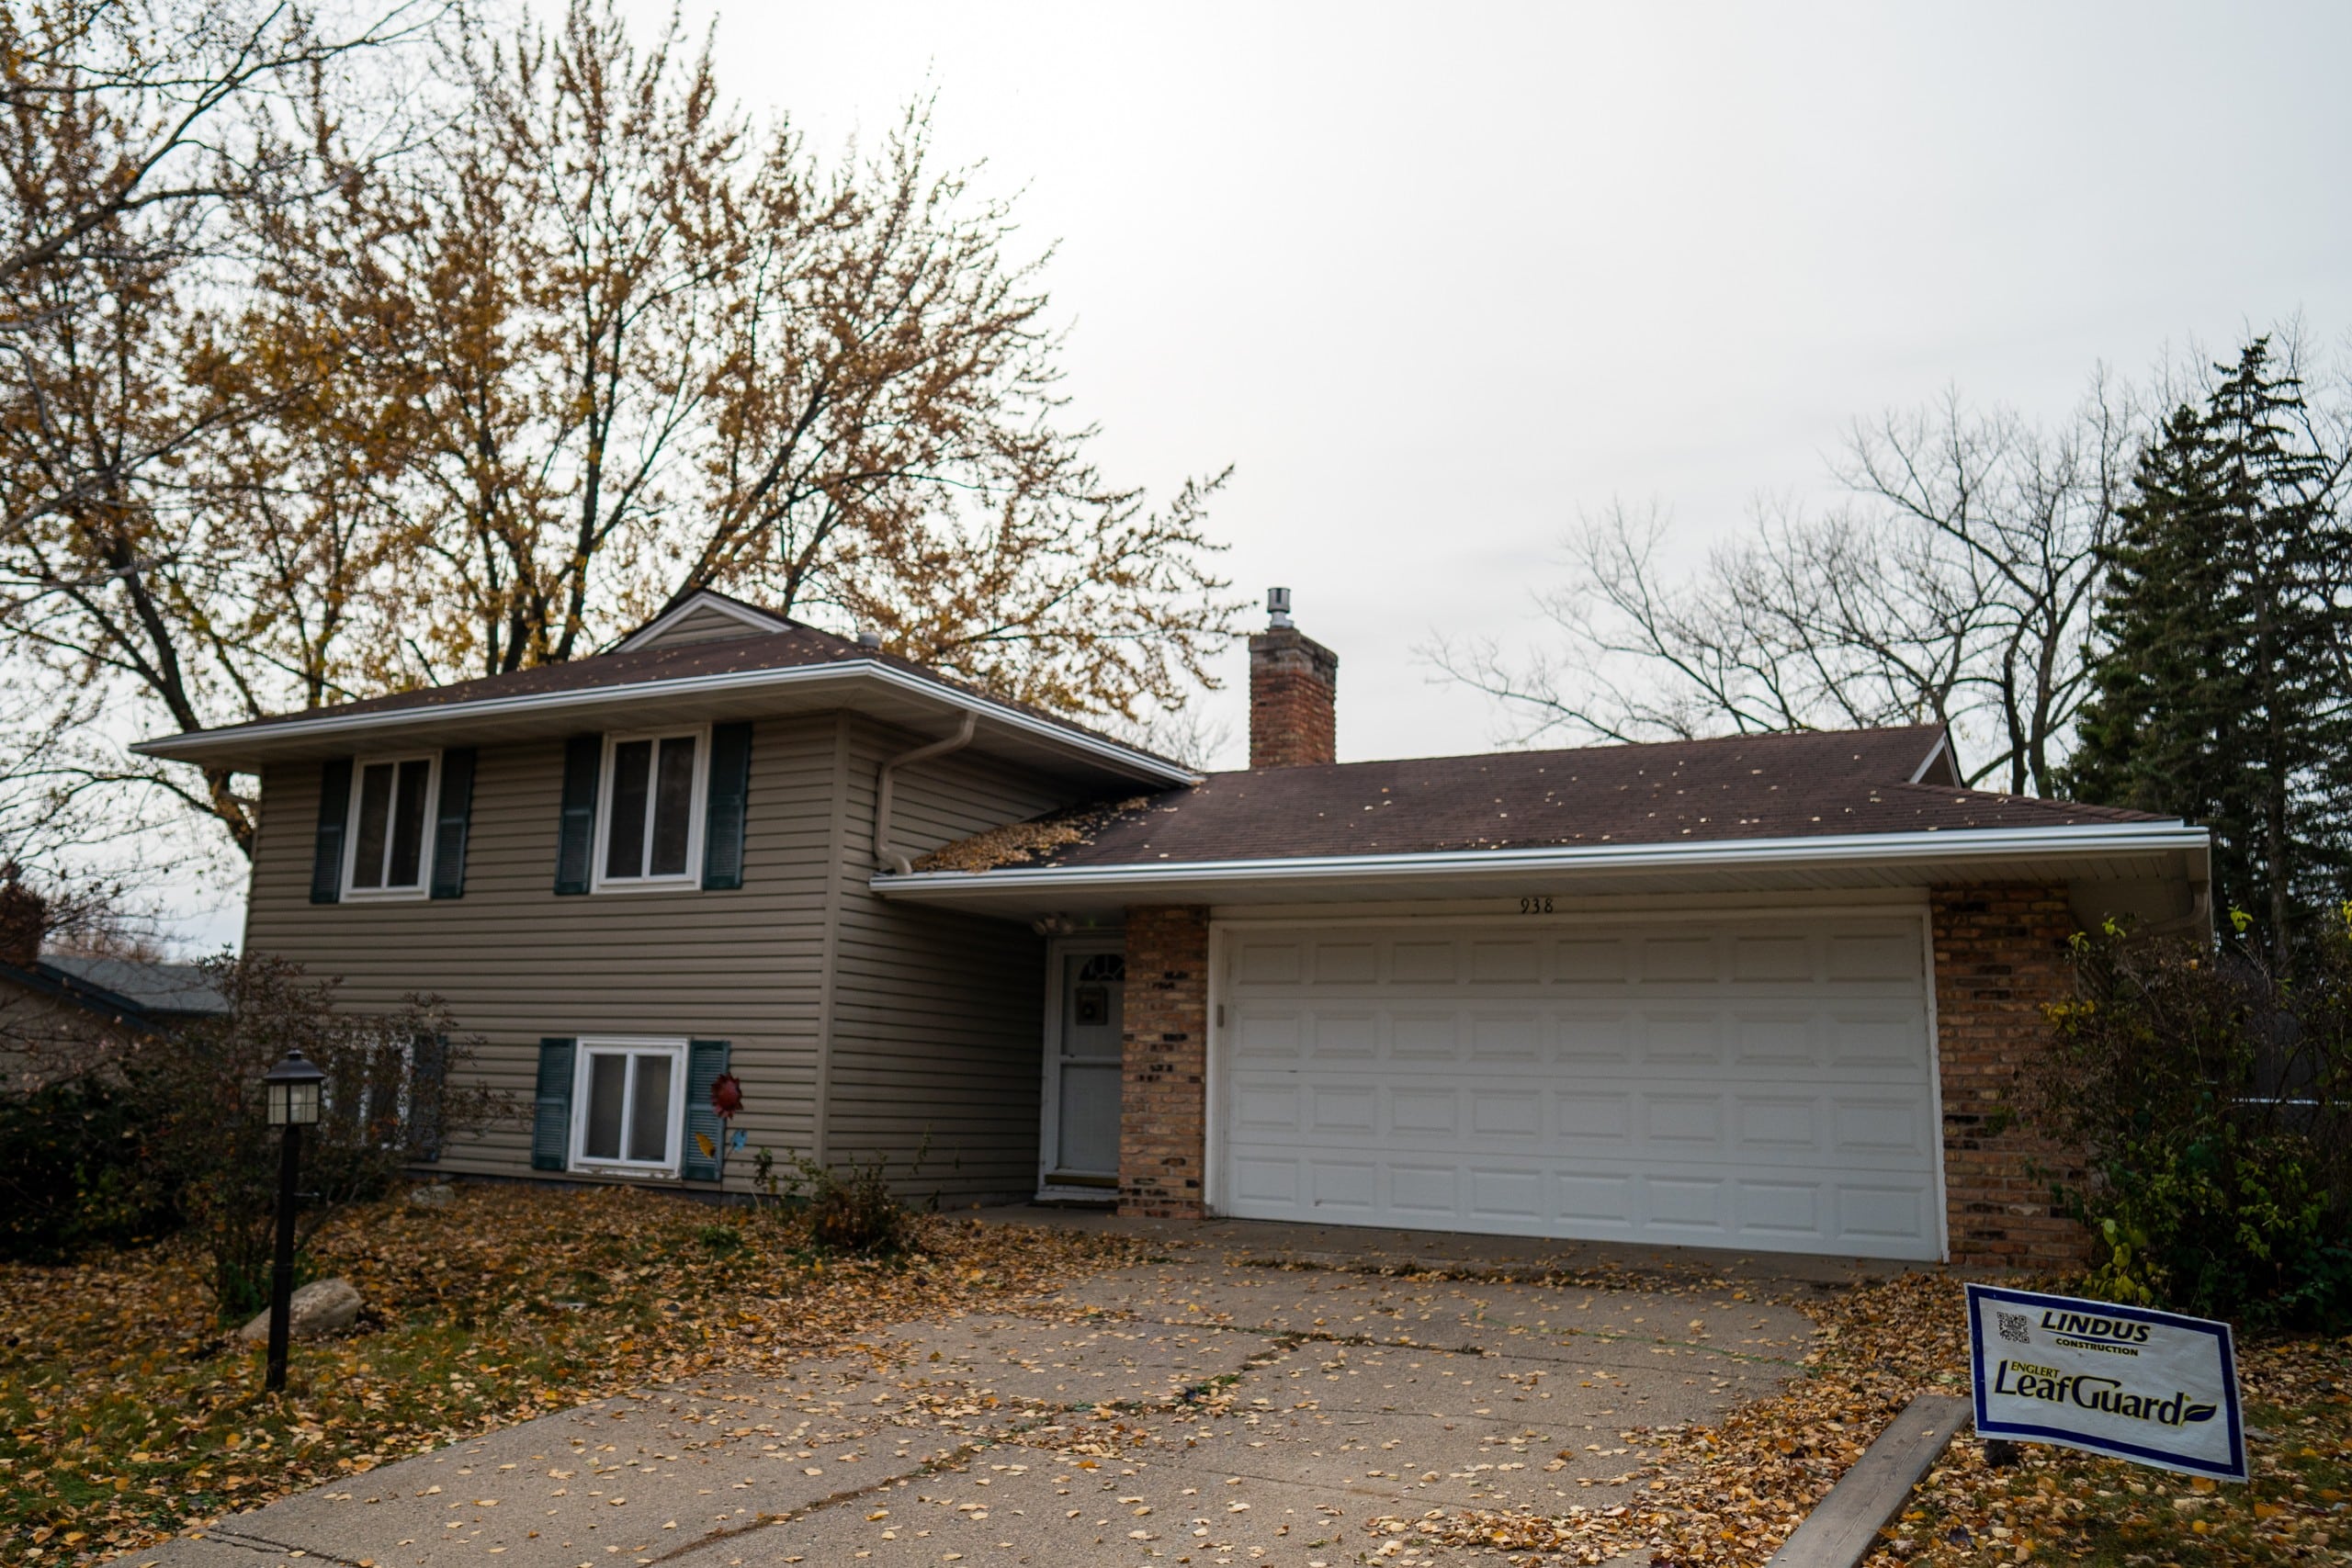 A newly installed gutter on a home in the fall with leaves on the ground.